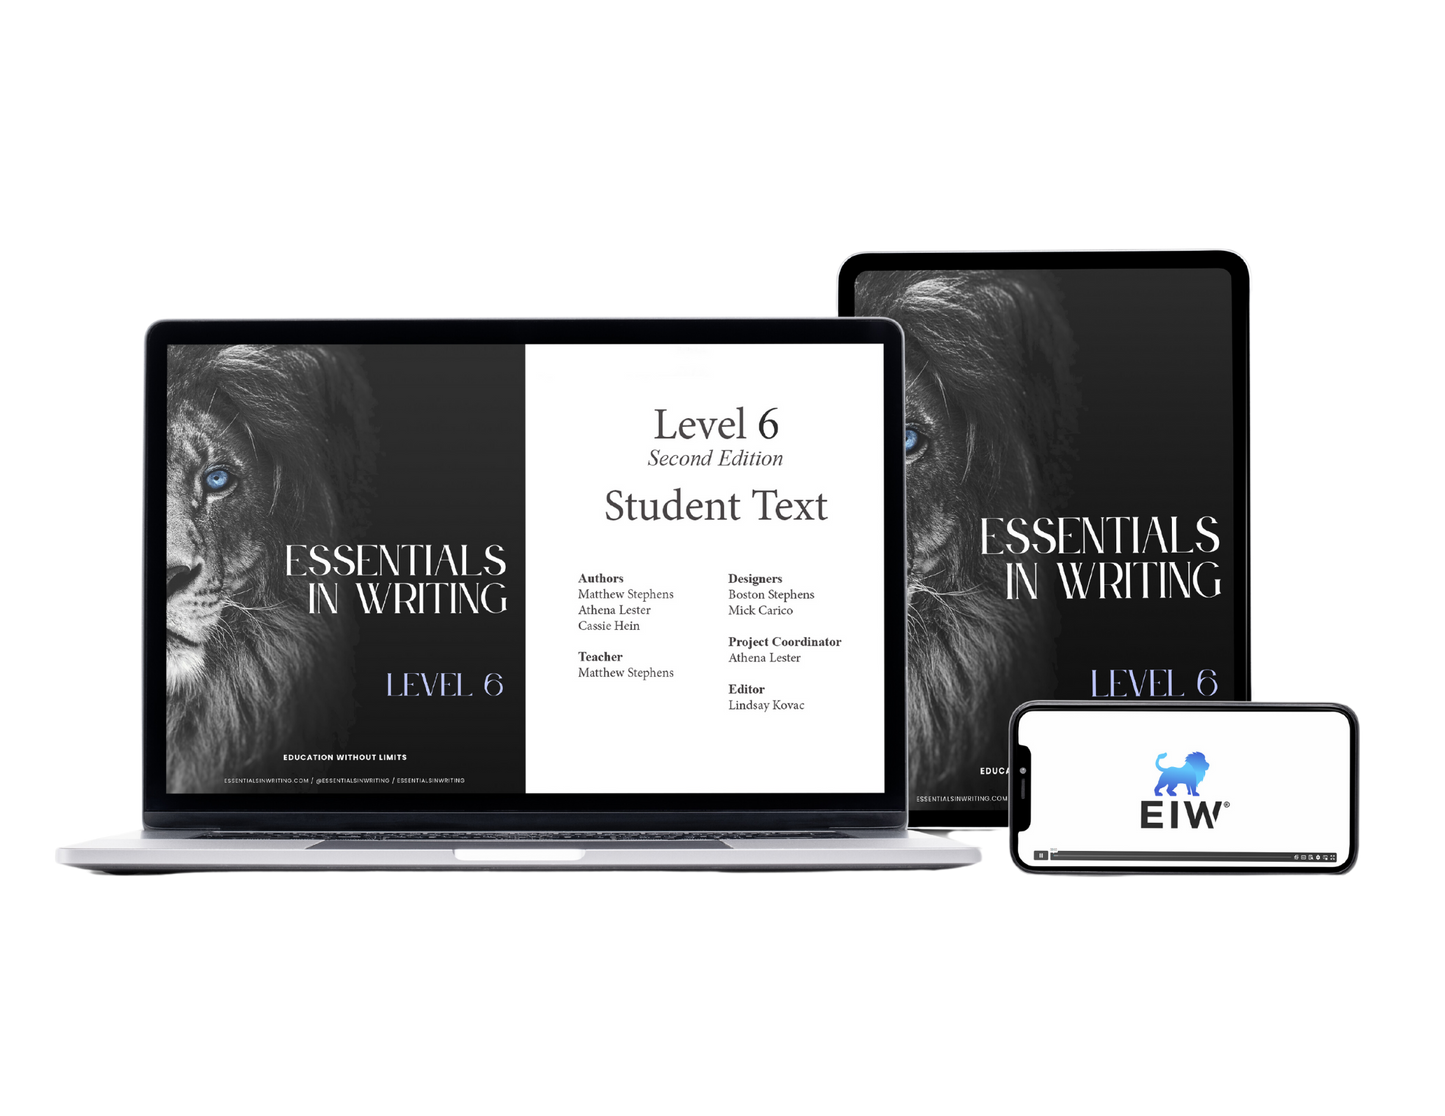 Essentials in Writing Level 6 Second Edition